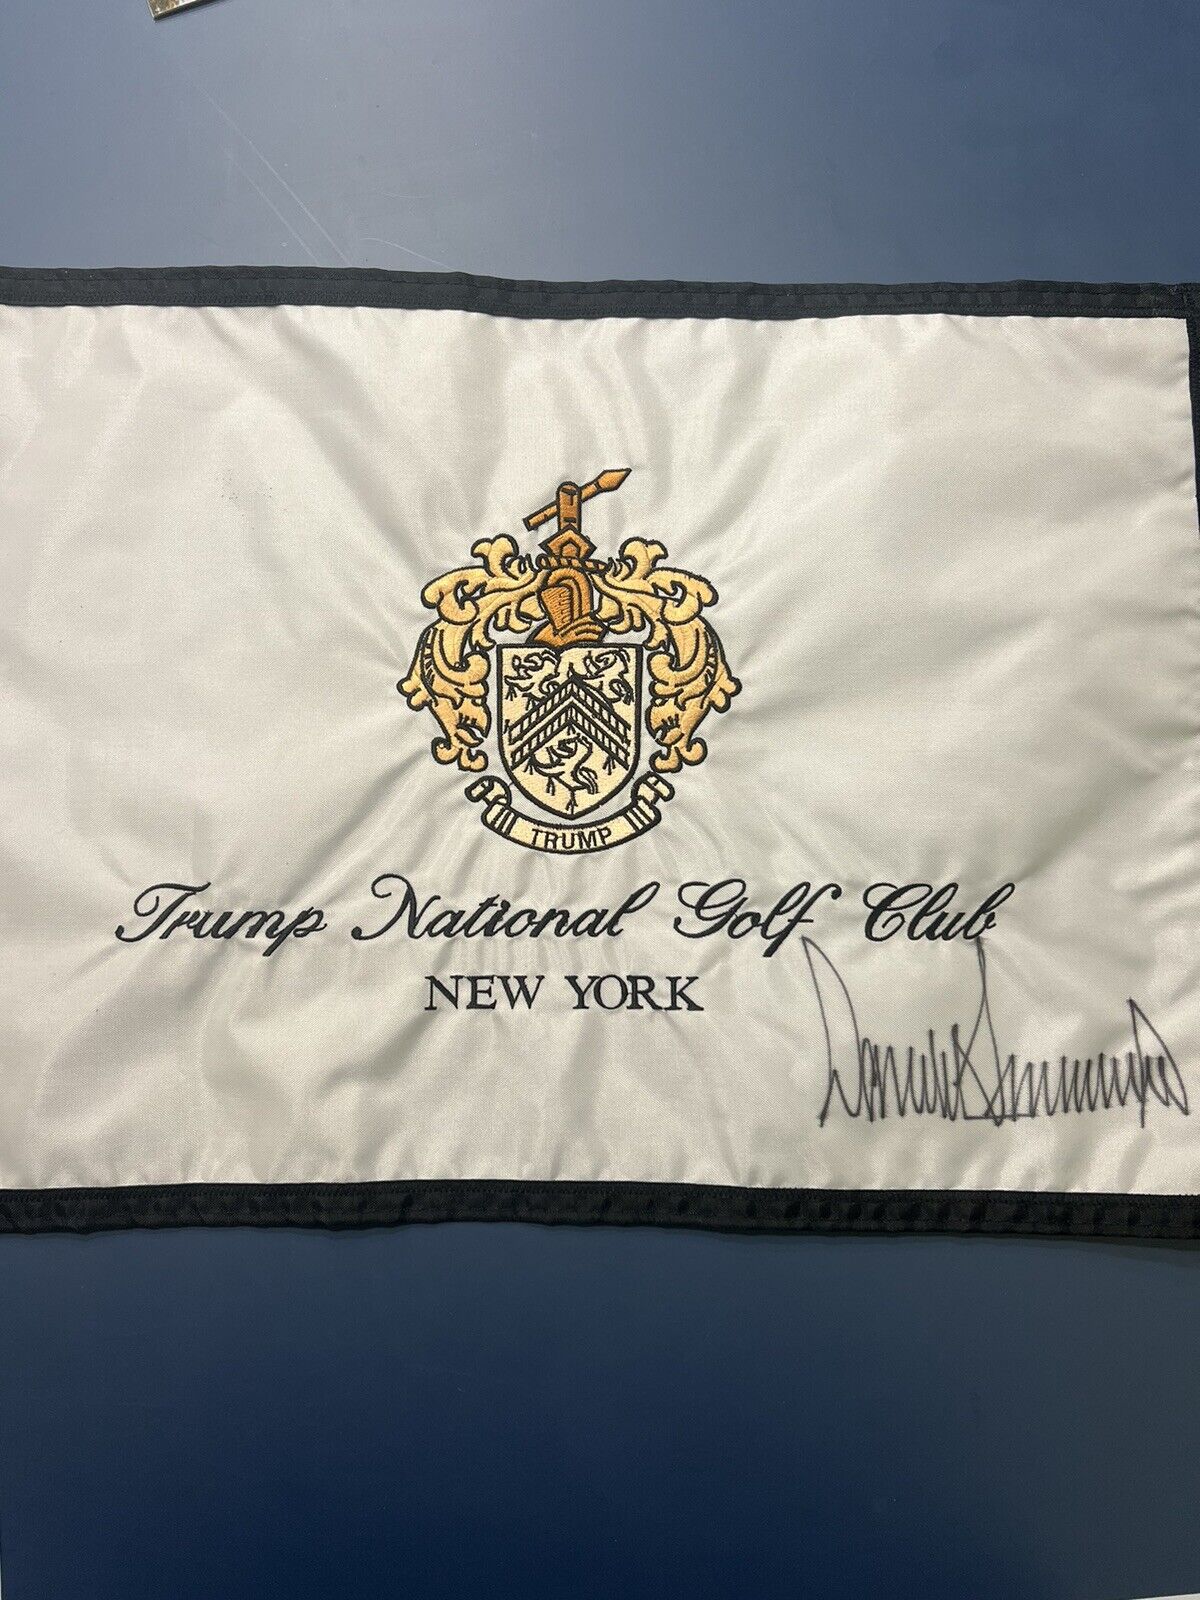 Donald Trump Autographed Pin Flag From Trump National Golf Club